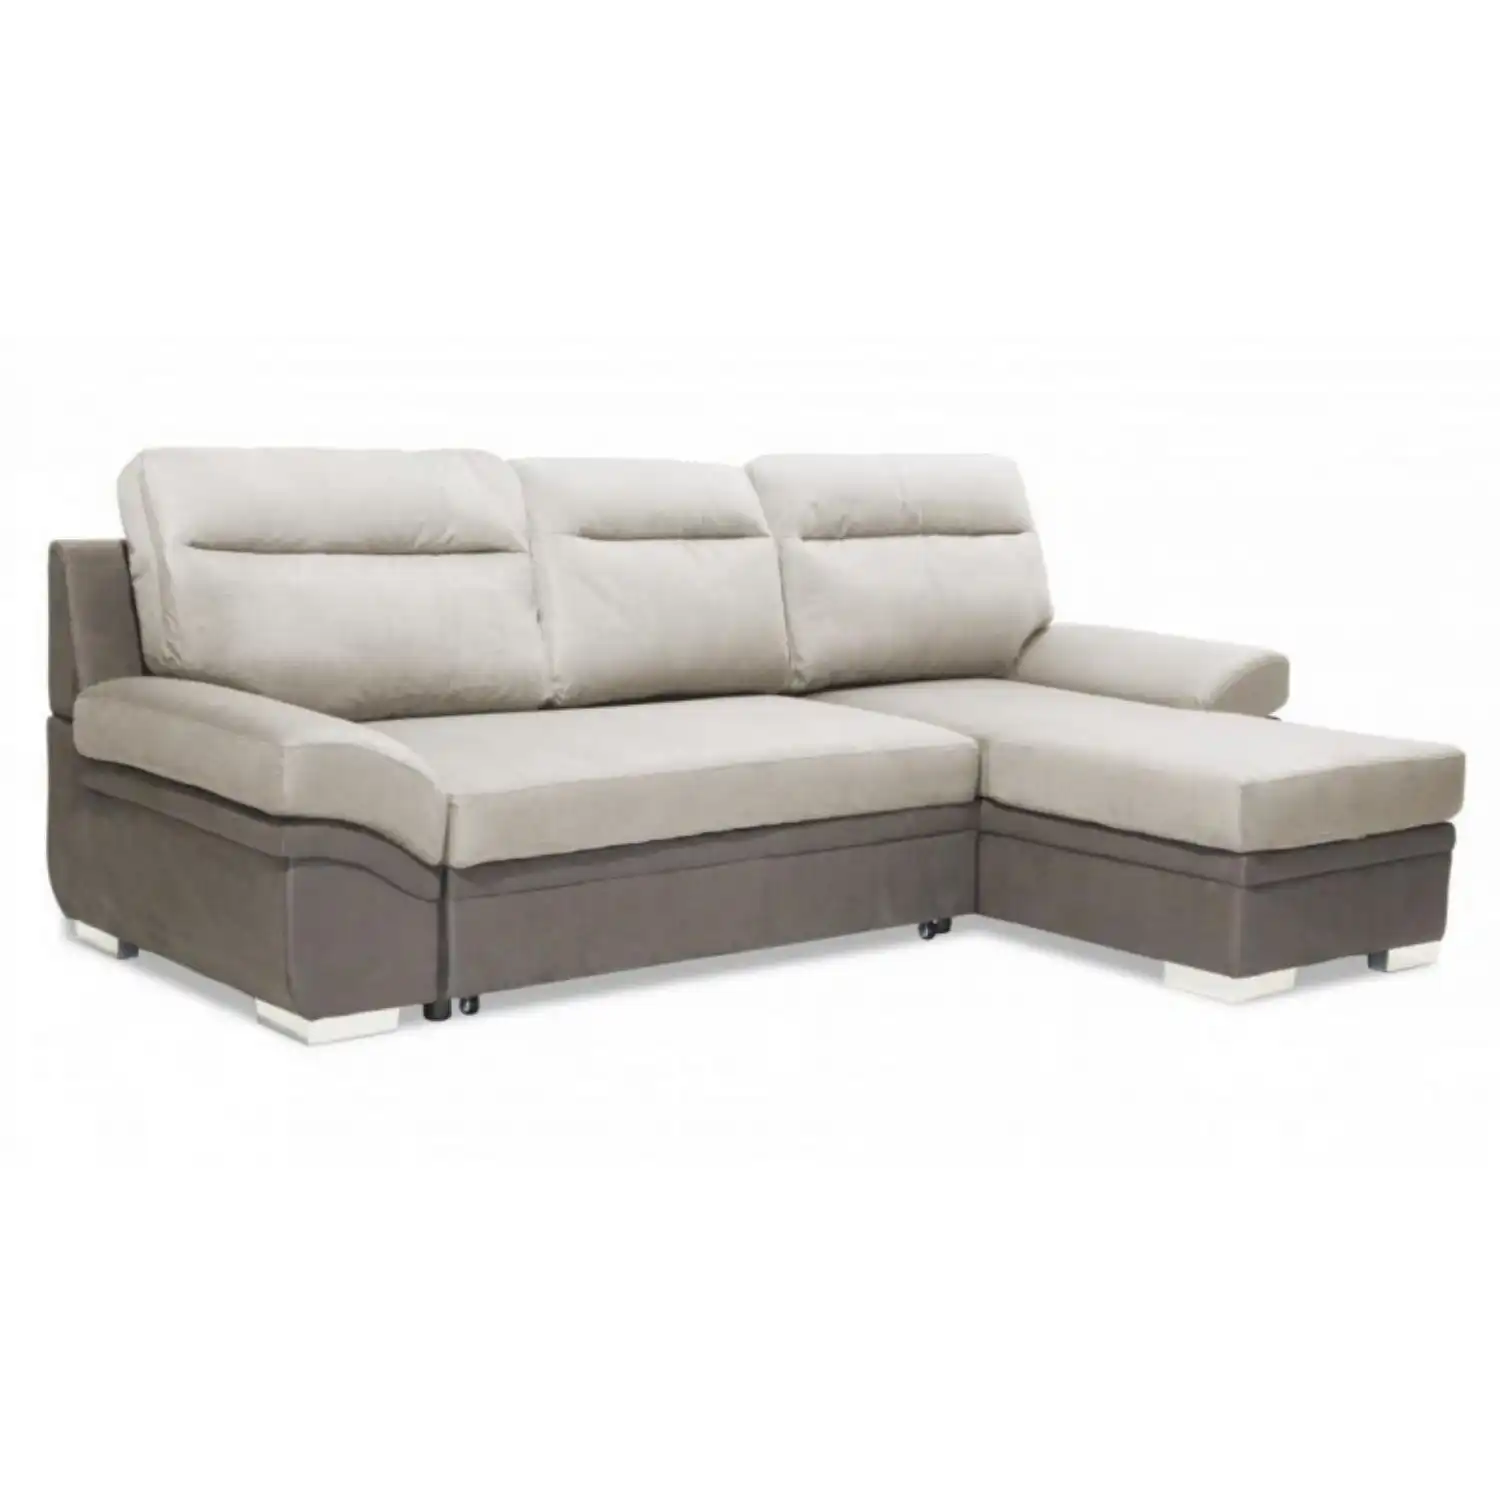 Jessy Fabric Corner Sofa Bed with Ottoman Chaise